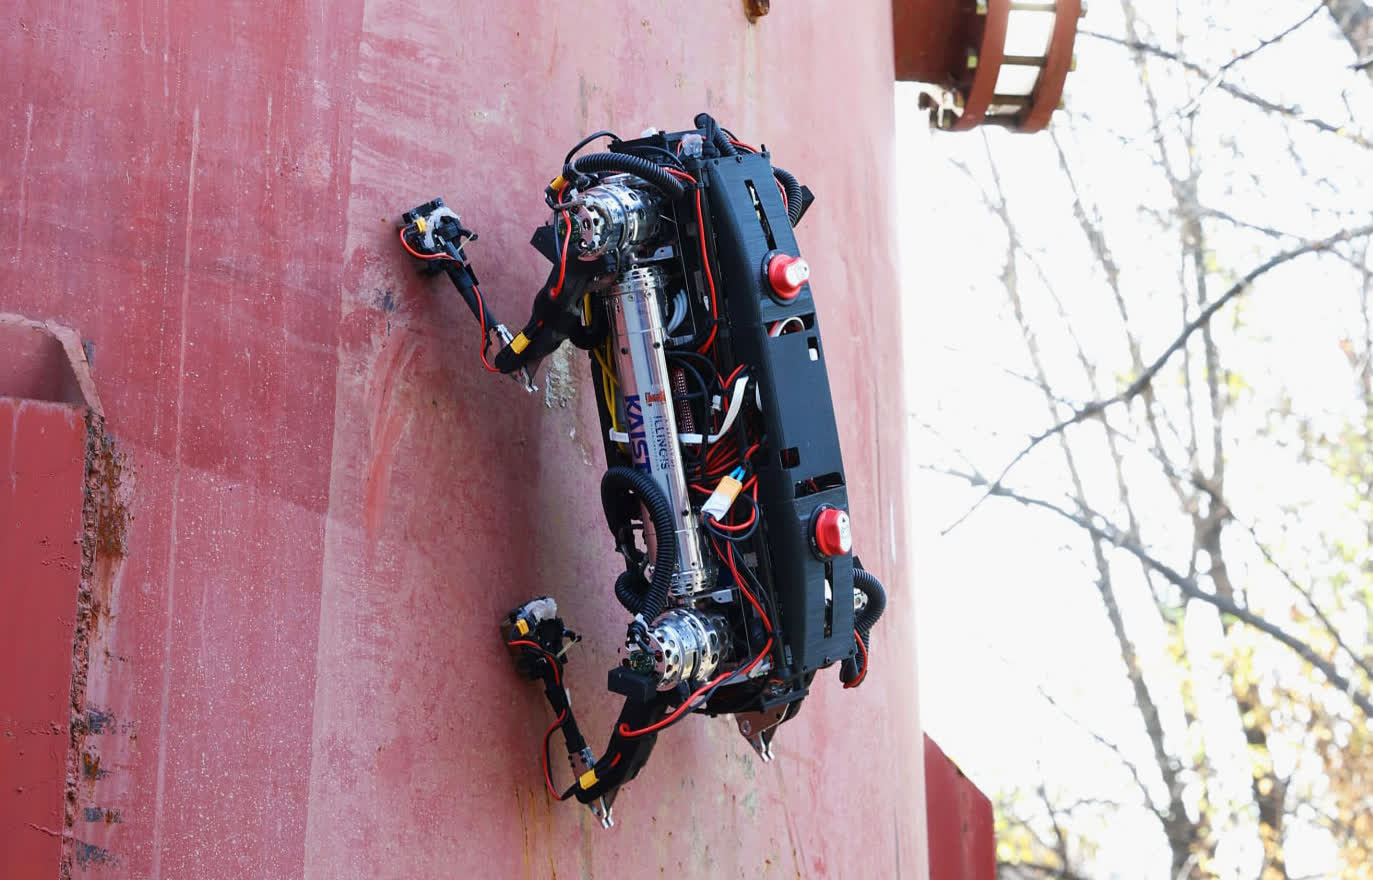 Quadruped robot with magnetic feet can climb walls and traverse ceilings